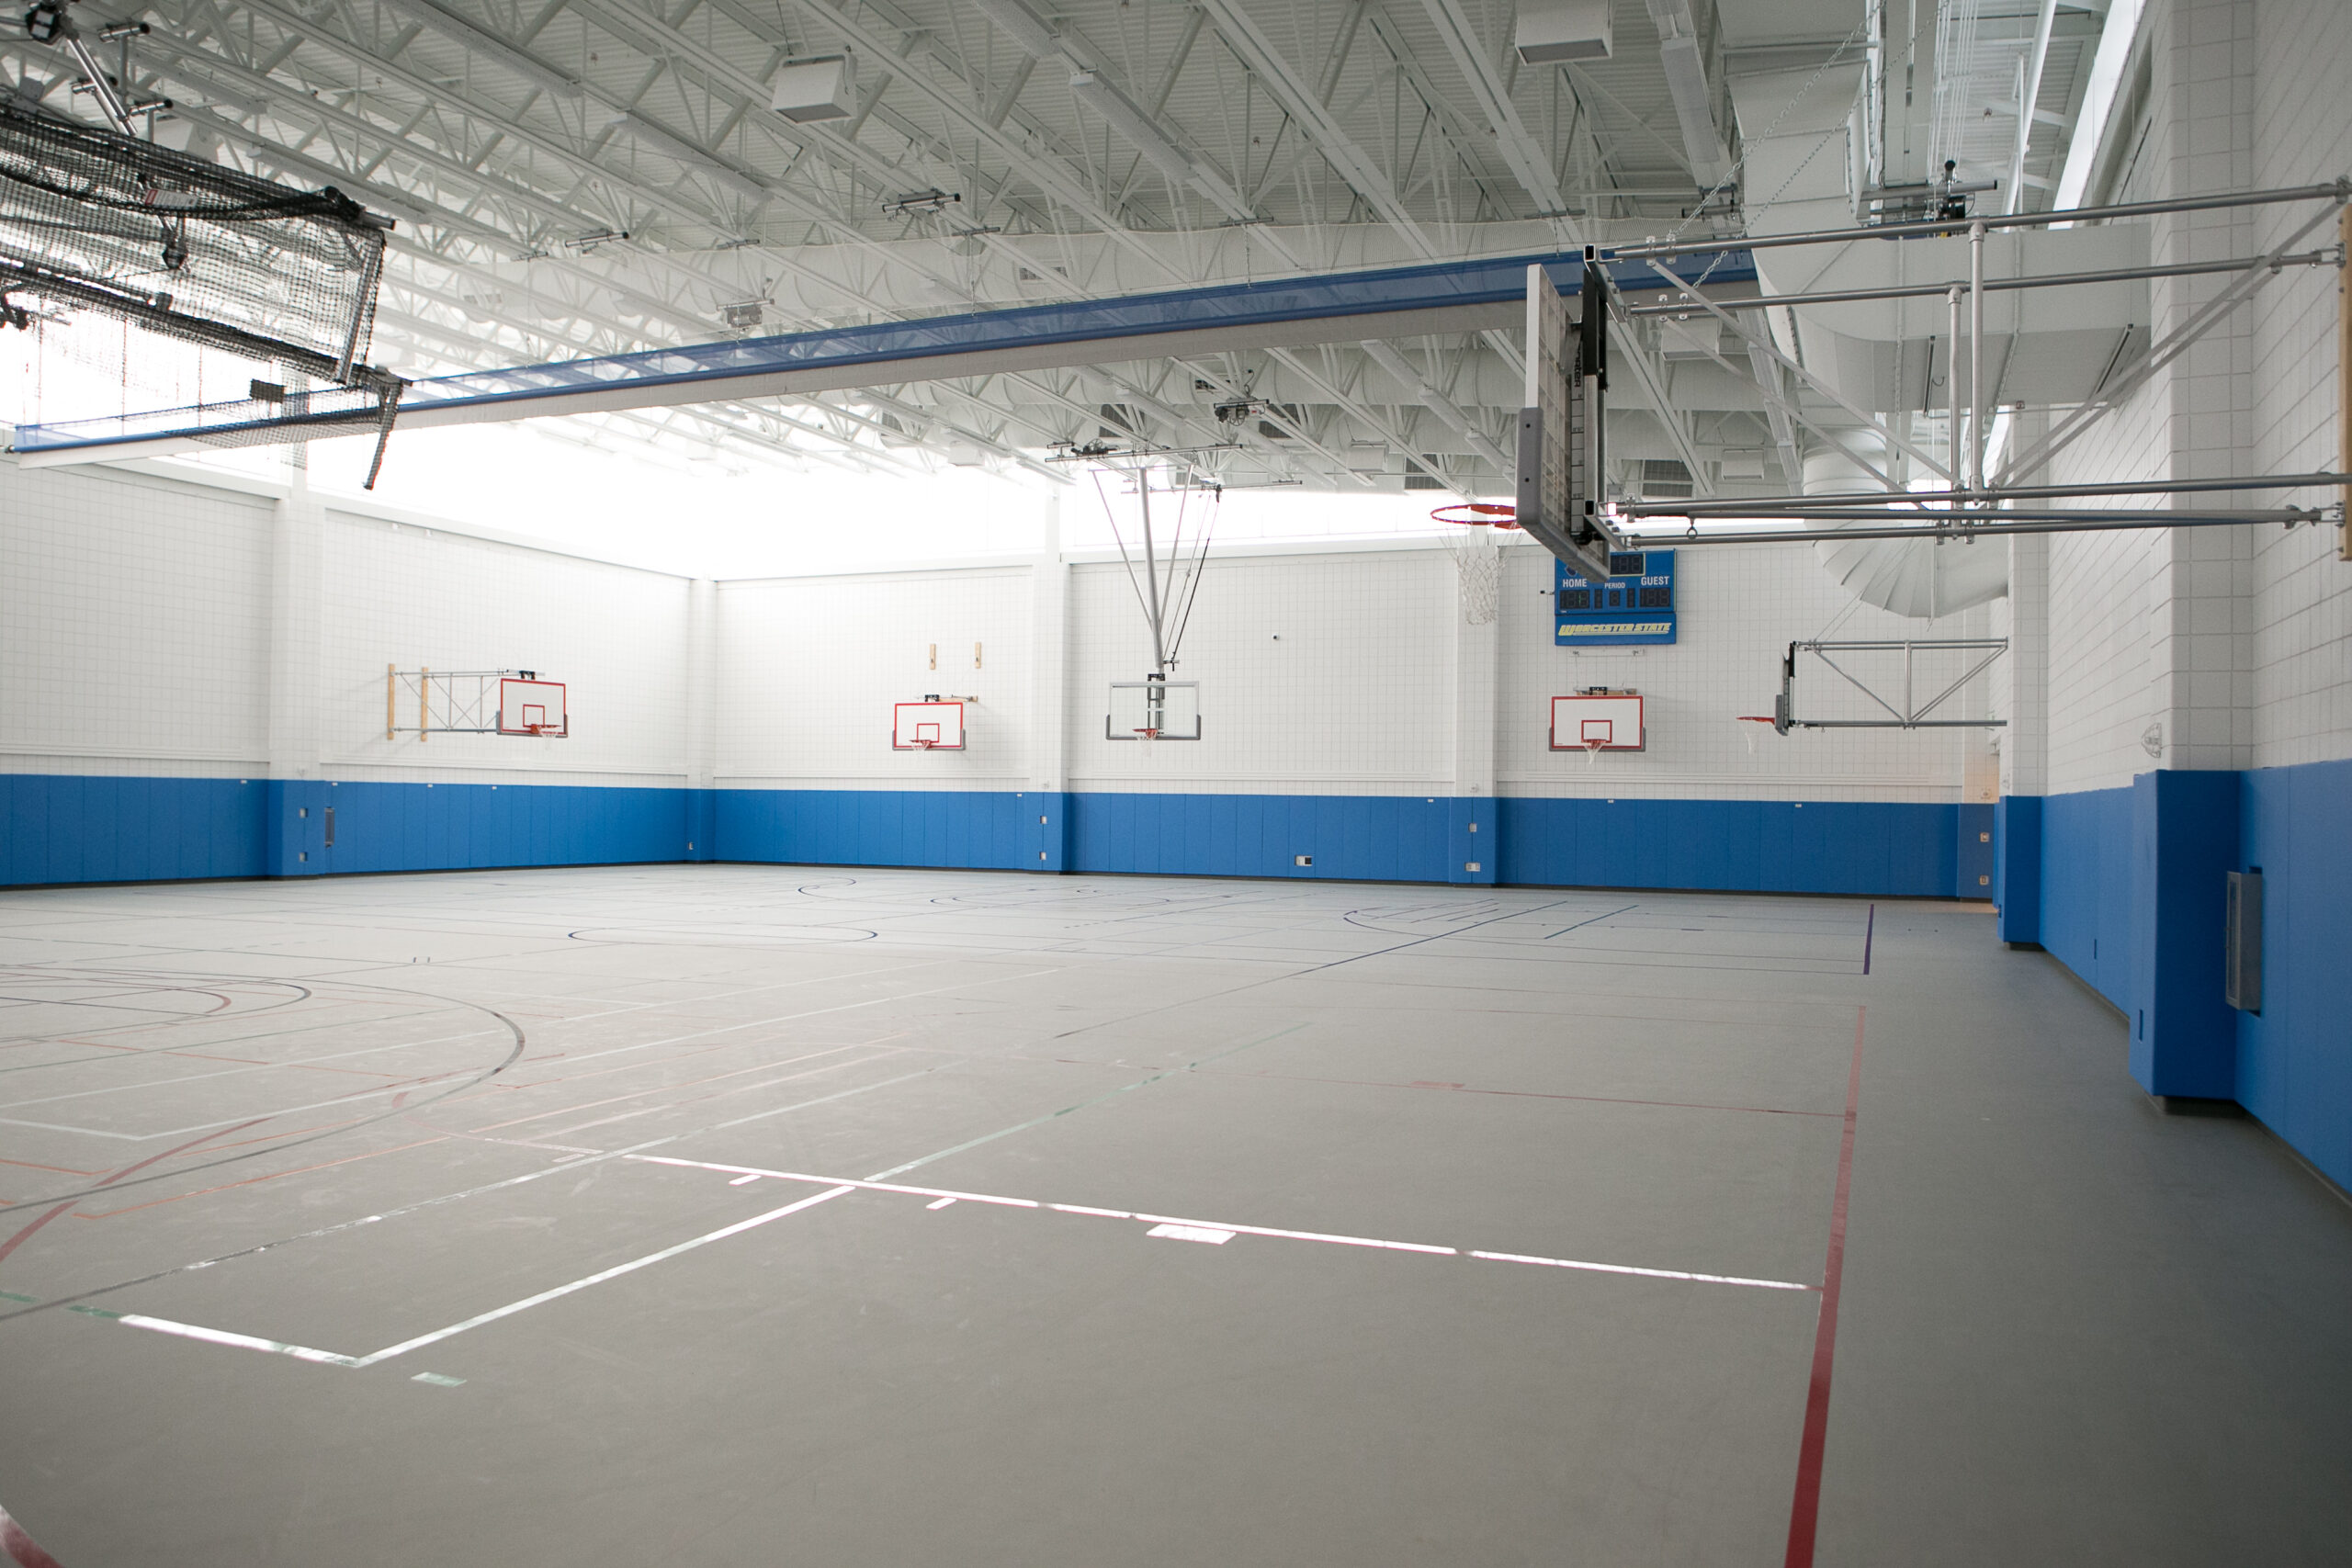 Empty practice basketball courts at Worcester State